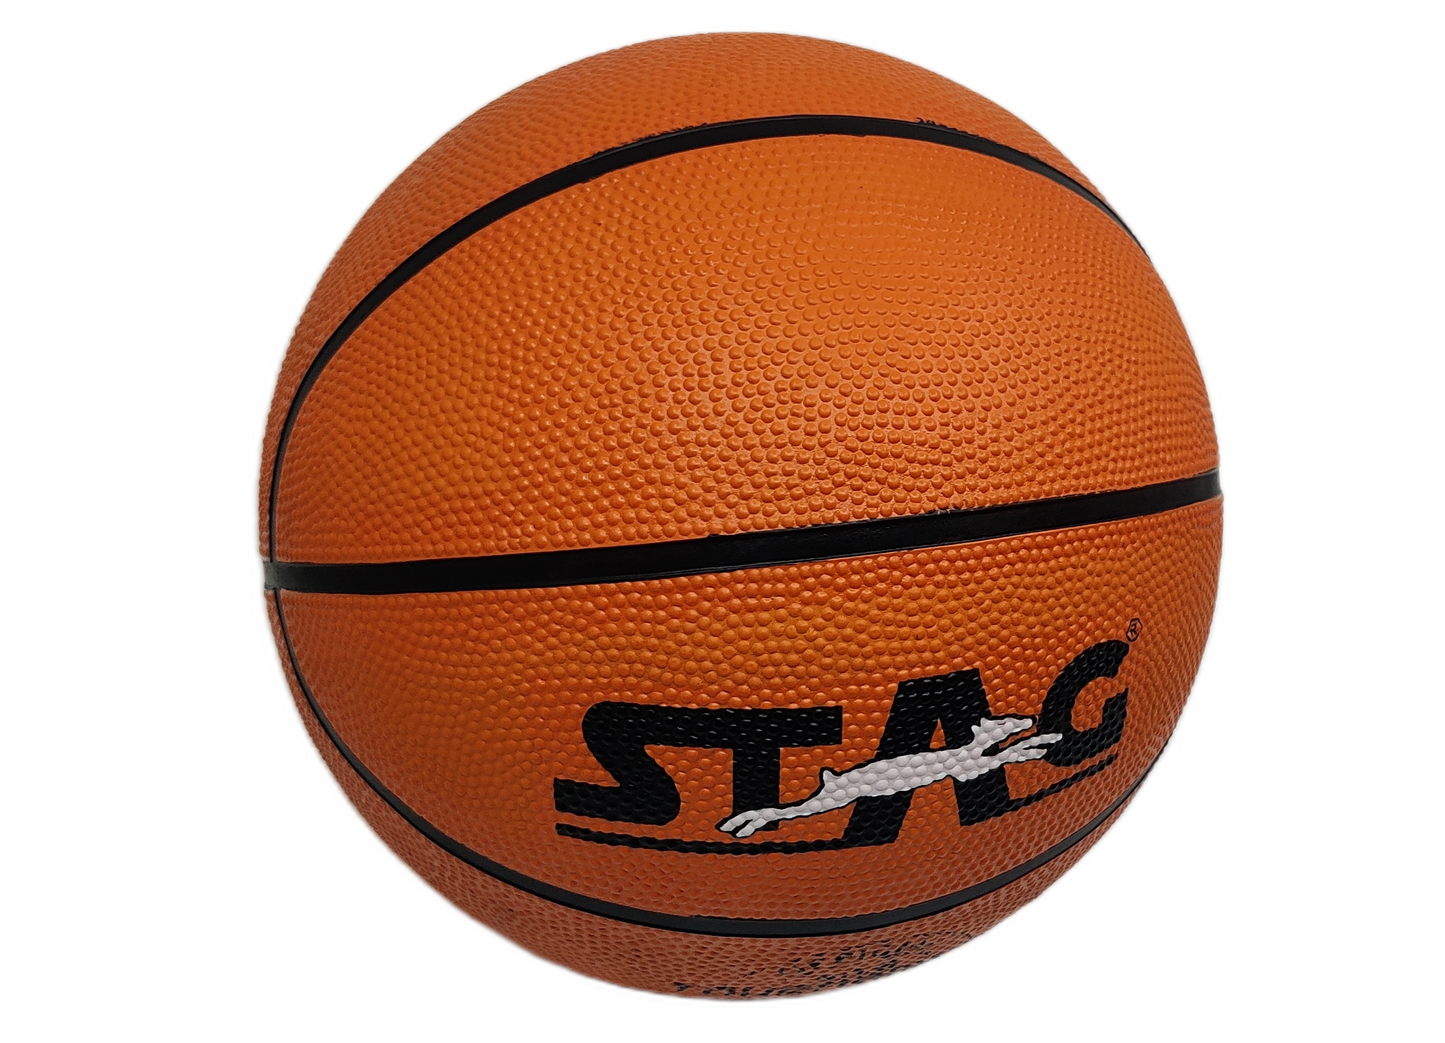 STAG BASKET BALL (TOURNAMENT) HIGH QUALITY, SIZE:06